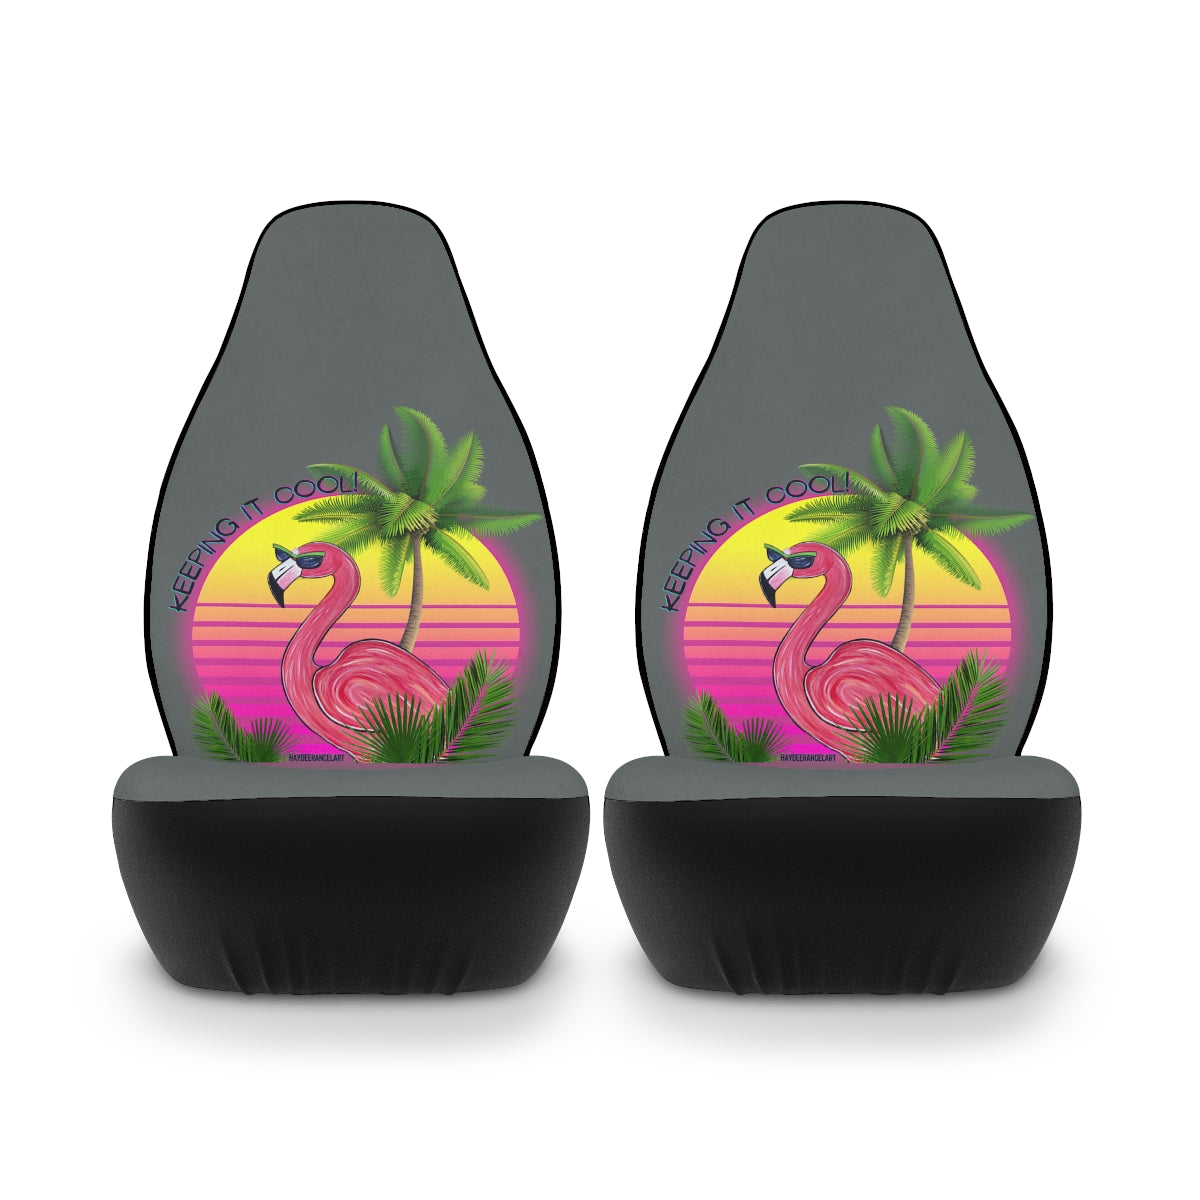 Keeping It Cool Flamingo Beach Sunset Dark Grey Polyester Car Seat Covers (Set of 2)